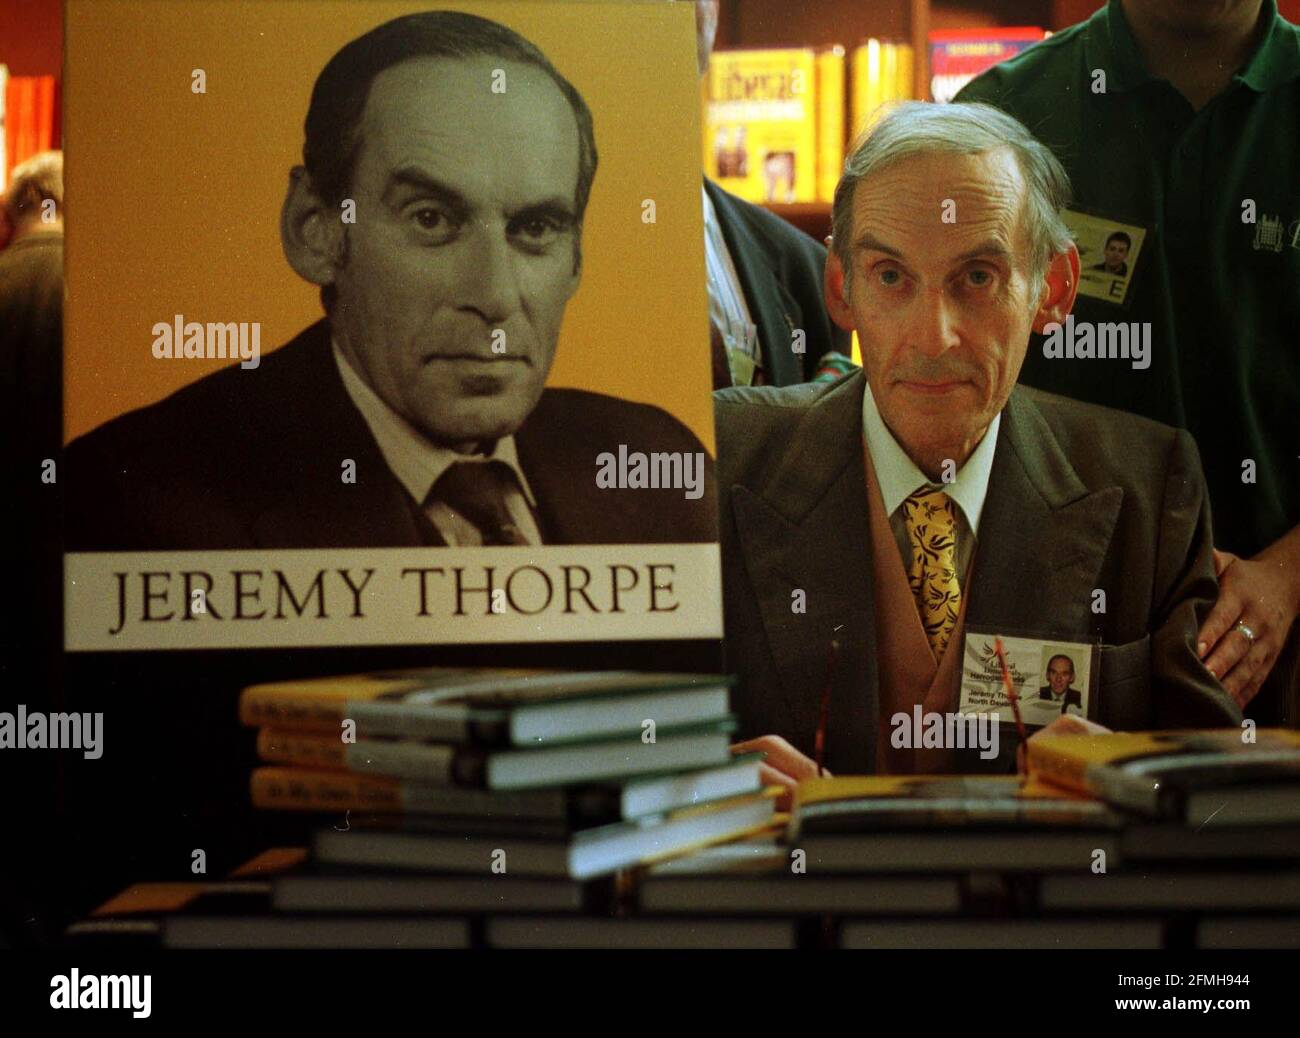 Jeremy Thorpe Liberal Democrats Conference 1999   Jeremy Thorpe signing copies of his book in the conference exhibition area Stock Photo